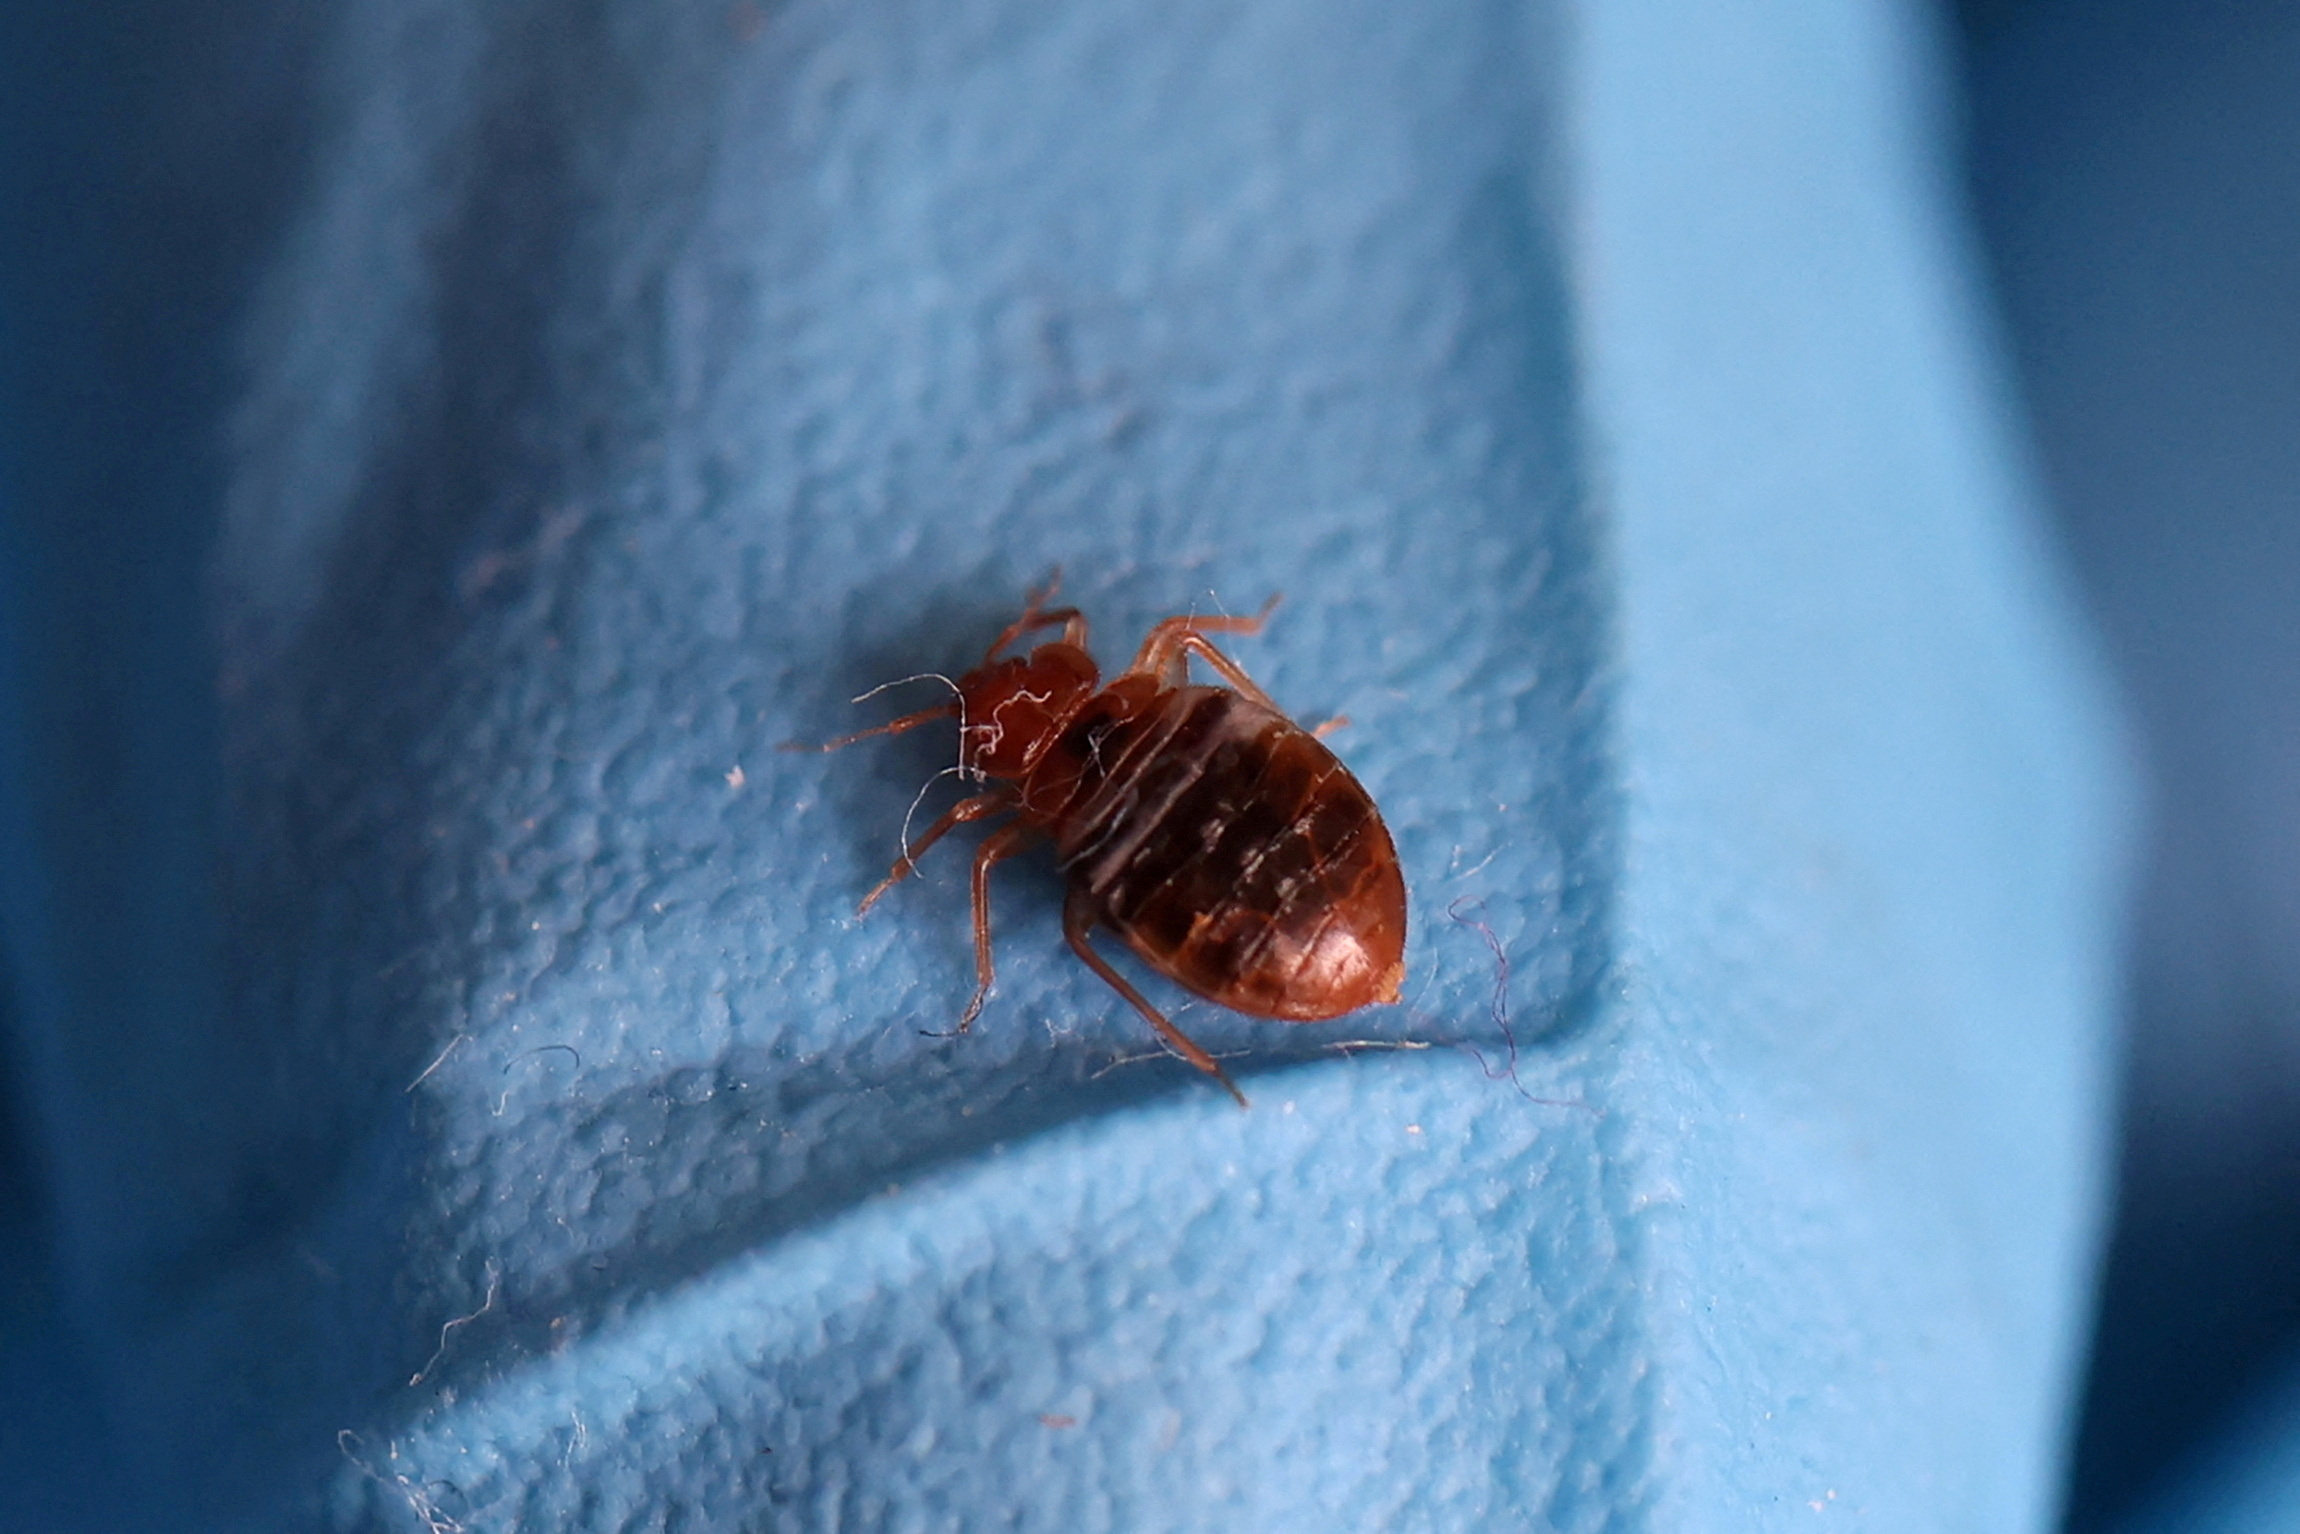 Bedbug infestations have occurred overseas with South Korea the latest country scrambling to deal with the pests. Photo: Reuters